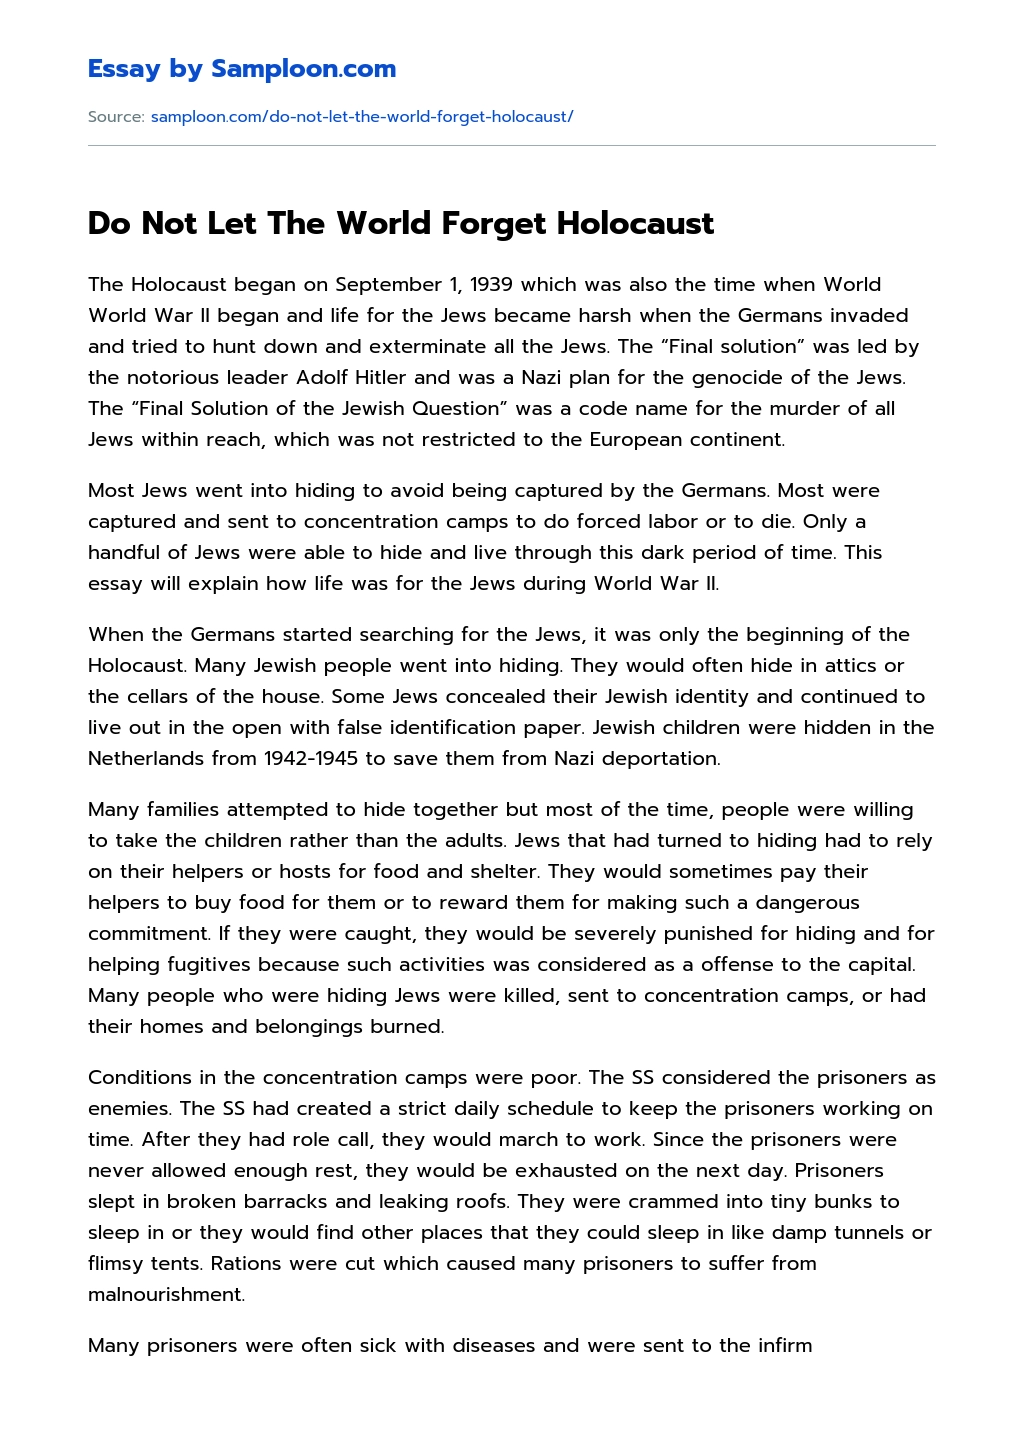 Do Not Let The World Forget Holocaust essay